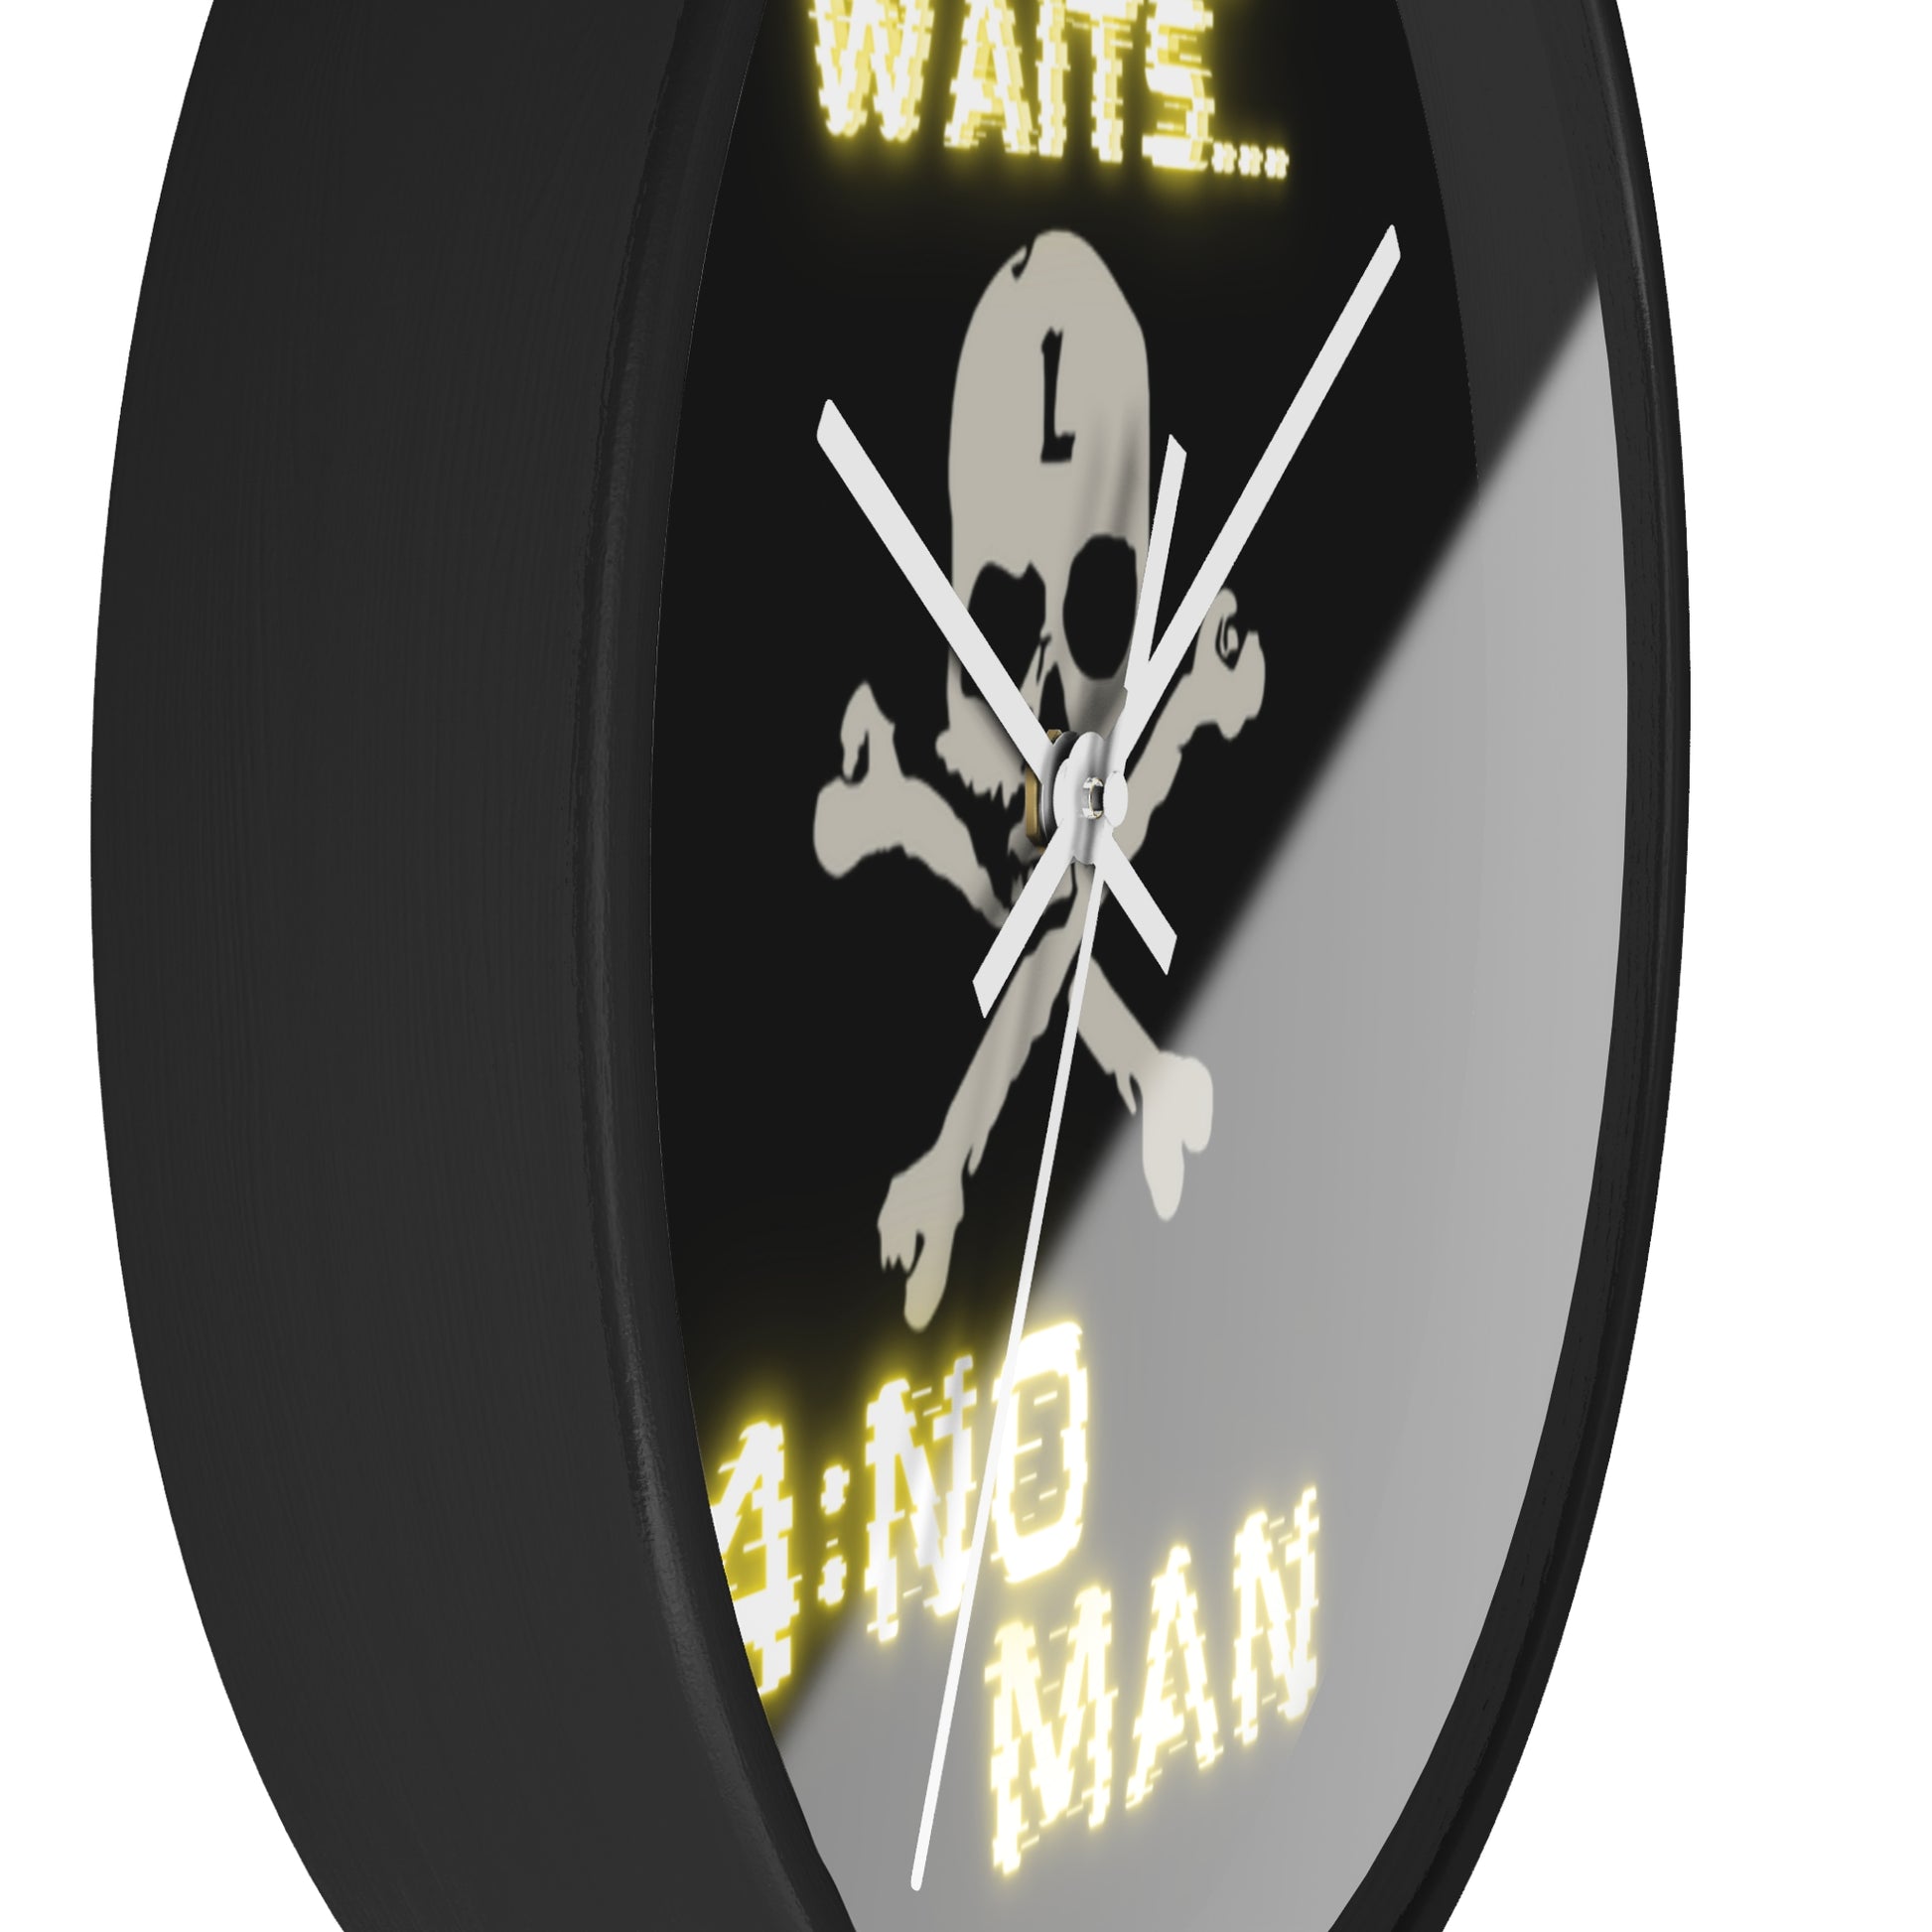  LoZer Wall Clock features "Time Waits 4 No Man" wrapped around the OG Logo. Encased in a Black Wooden frame 